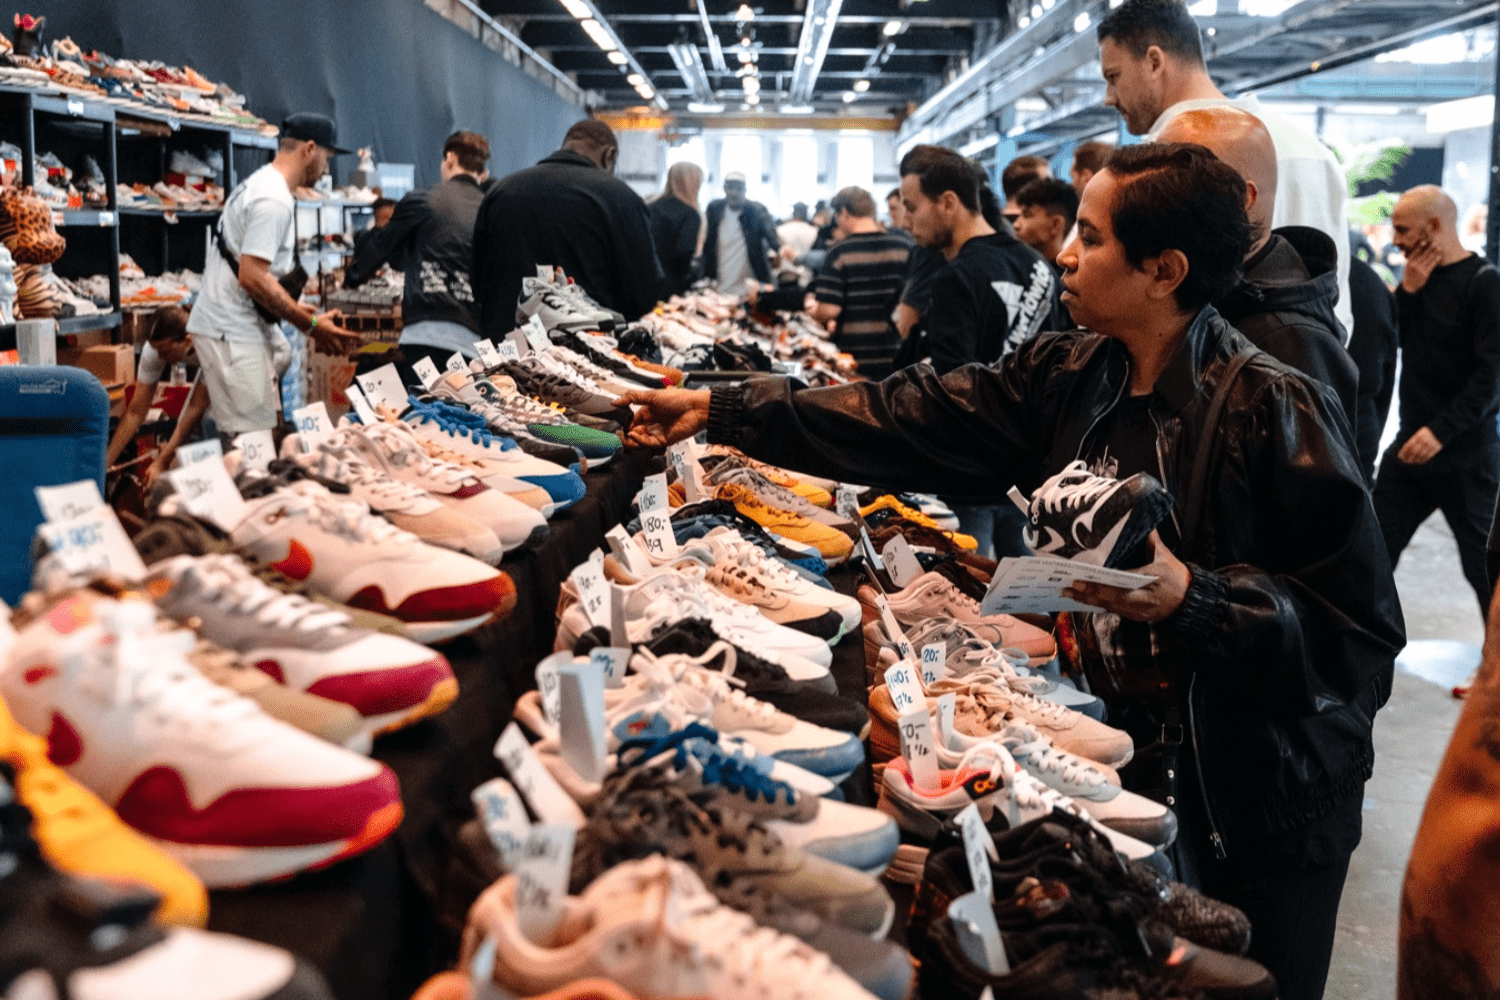 Get to know the Sellers at Sneakerness - Part 1